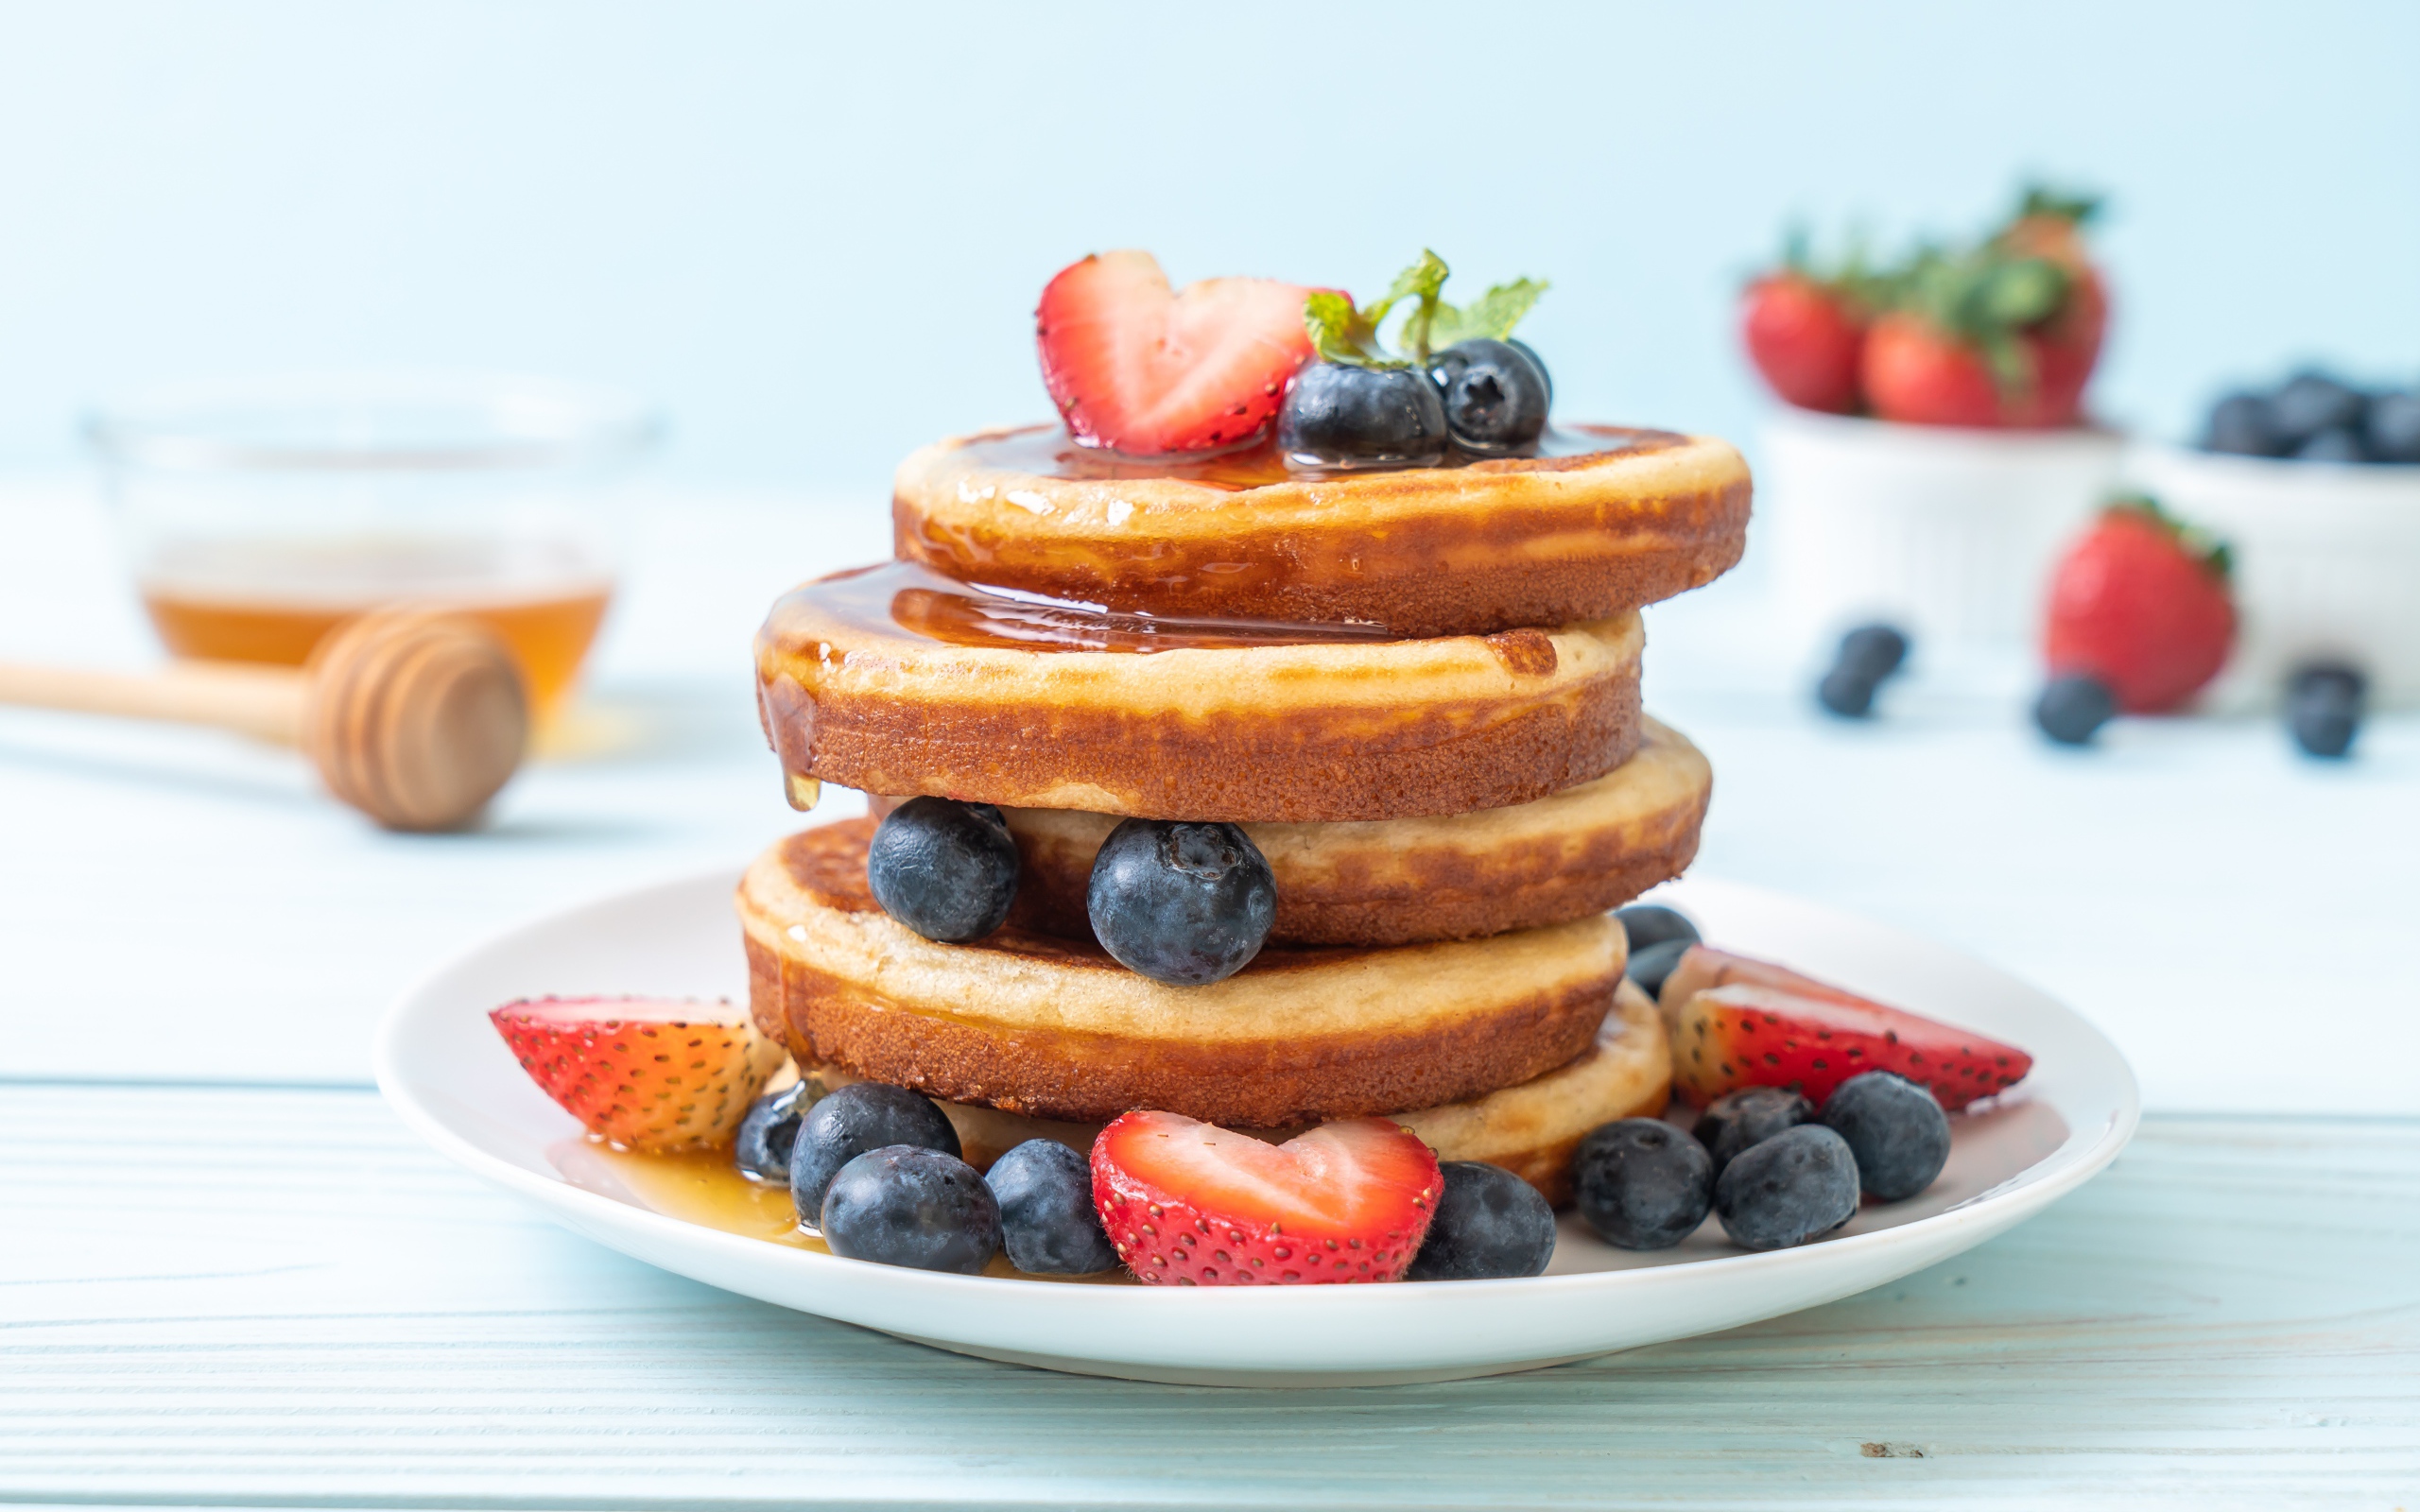 Lush pancakes with blueberries, strawberries and honey